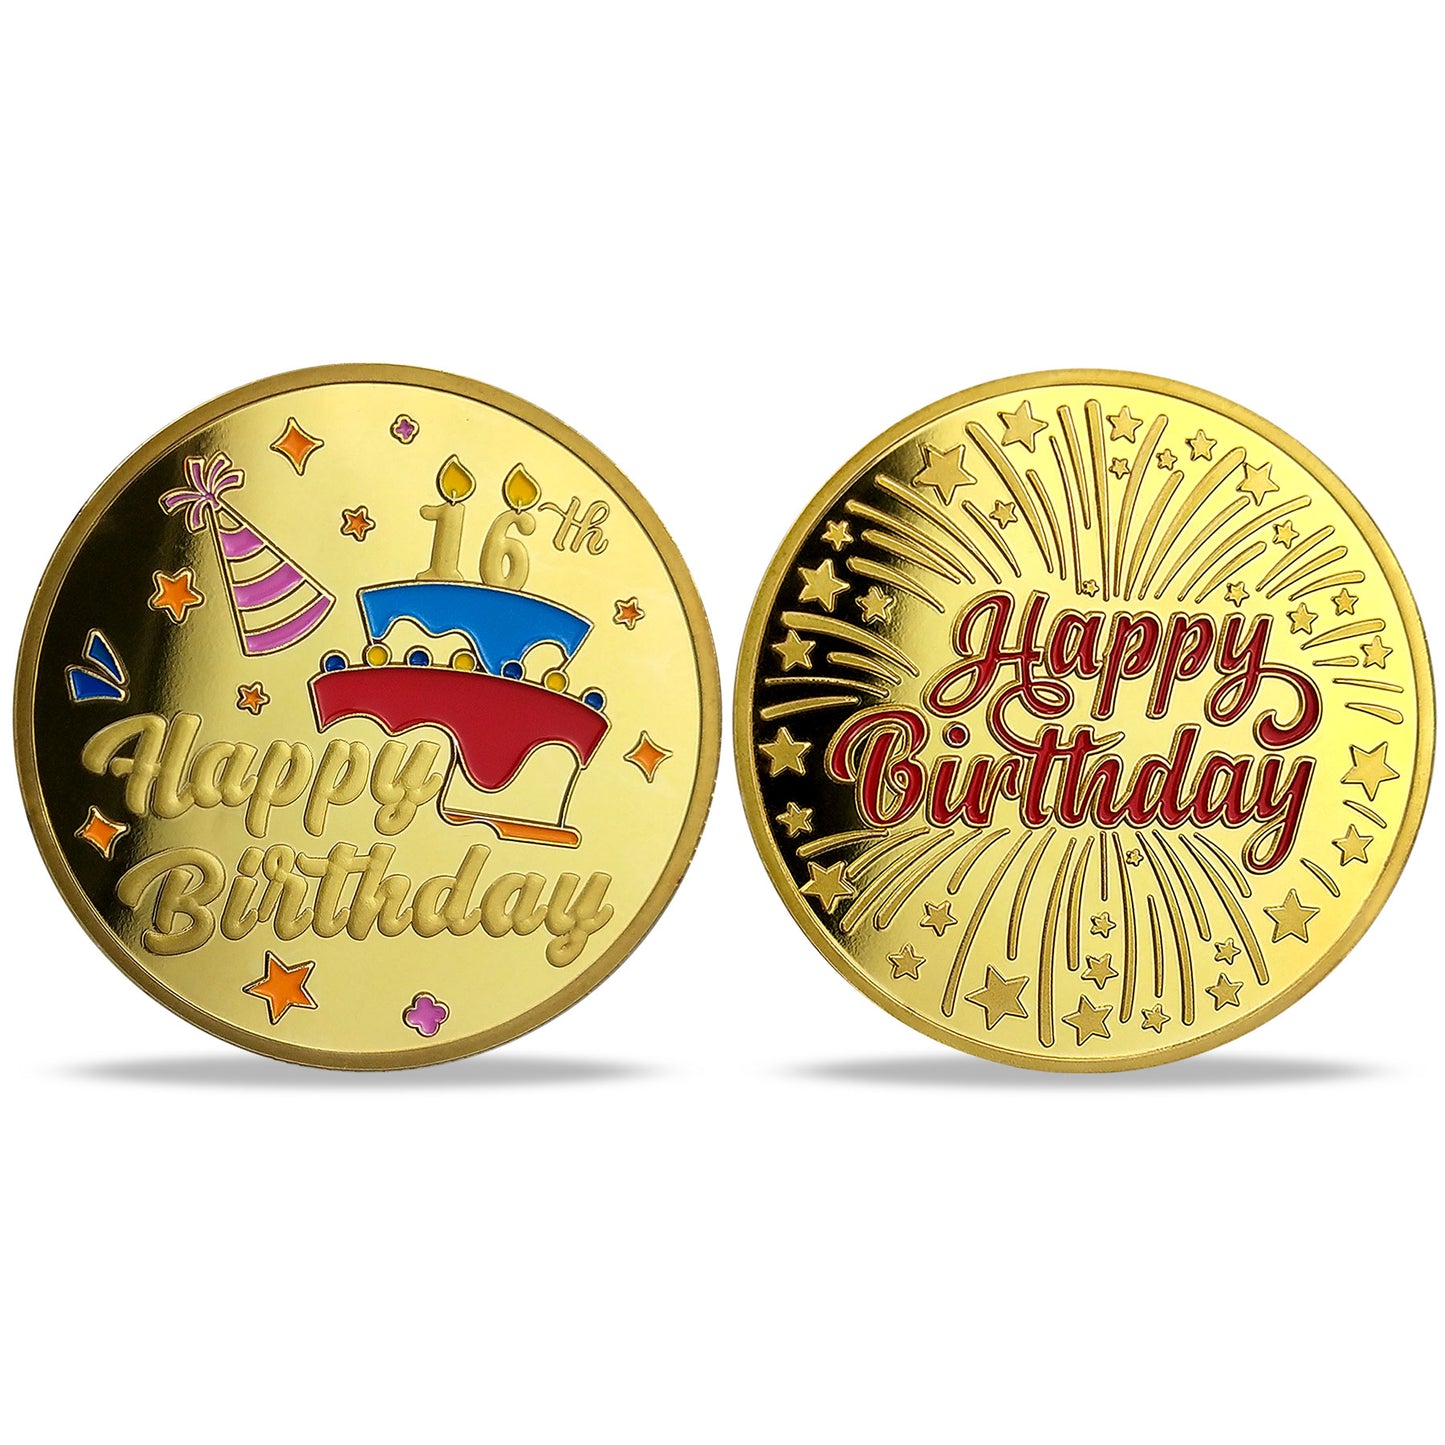 Happy Birthday Coin, Christian Birthday Gifts for Friends 15 Years,16 Years,18 Years Gold